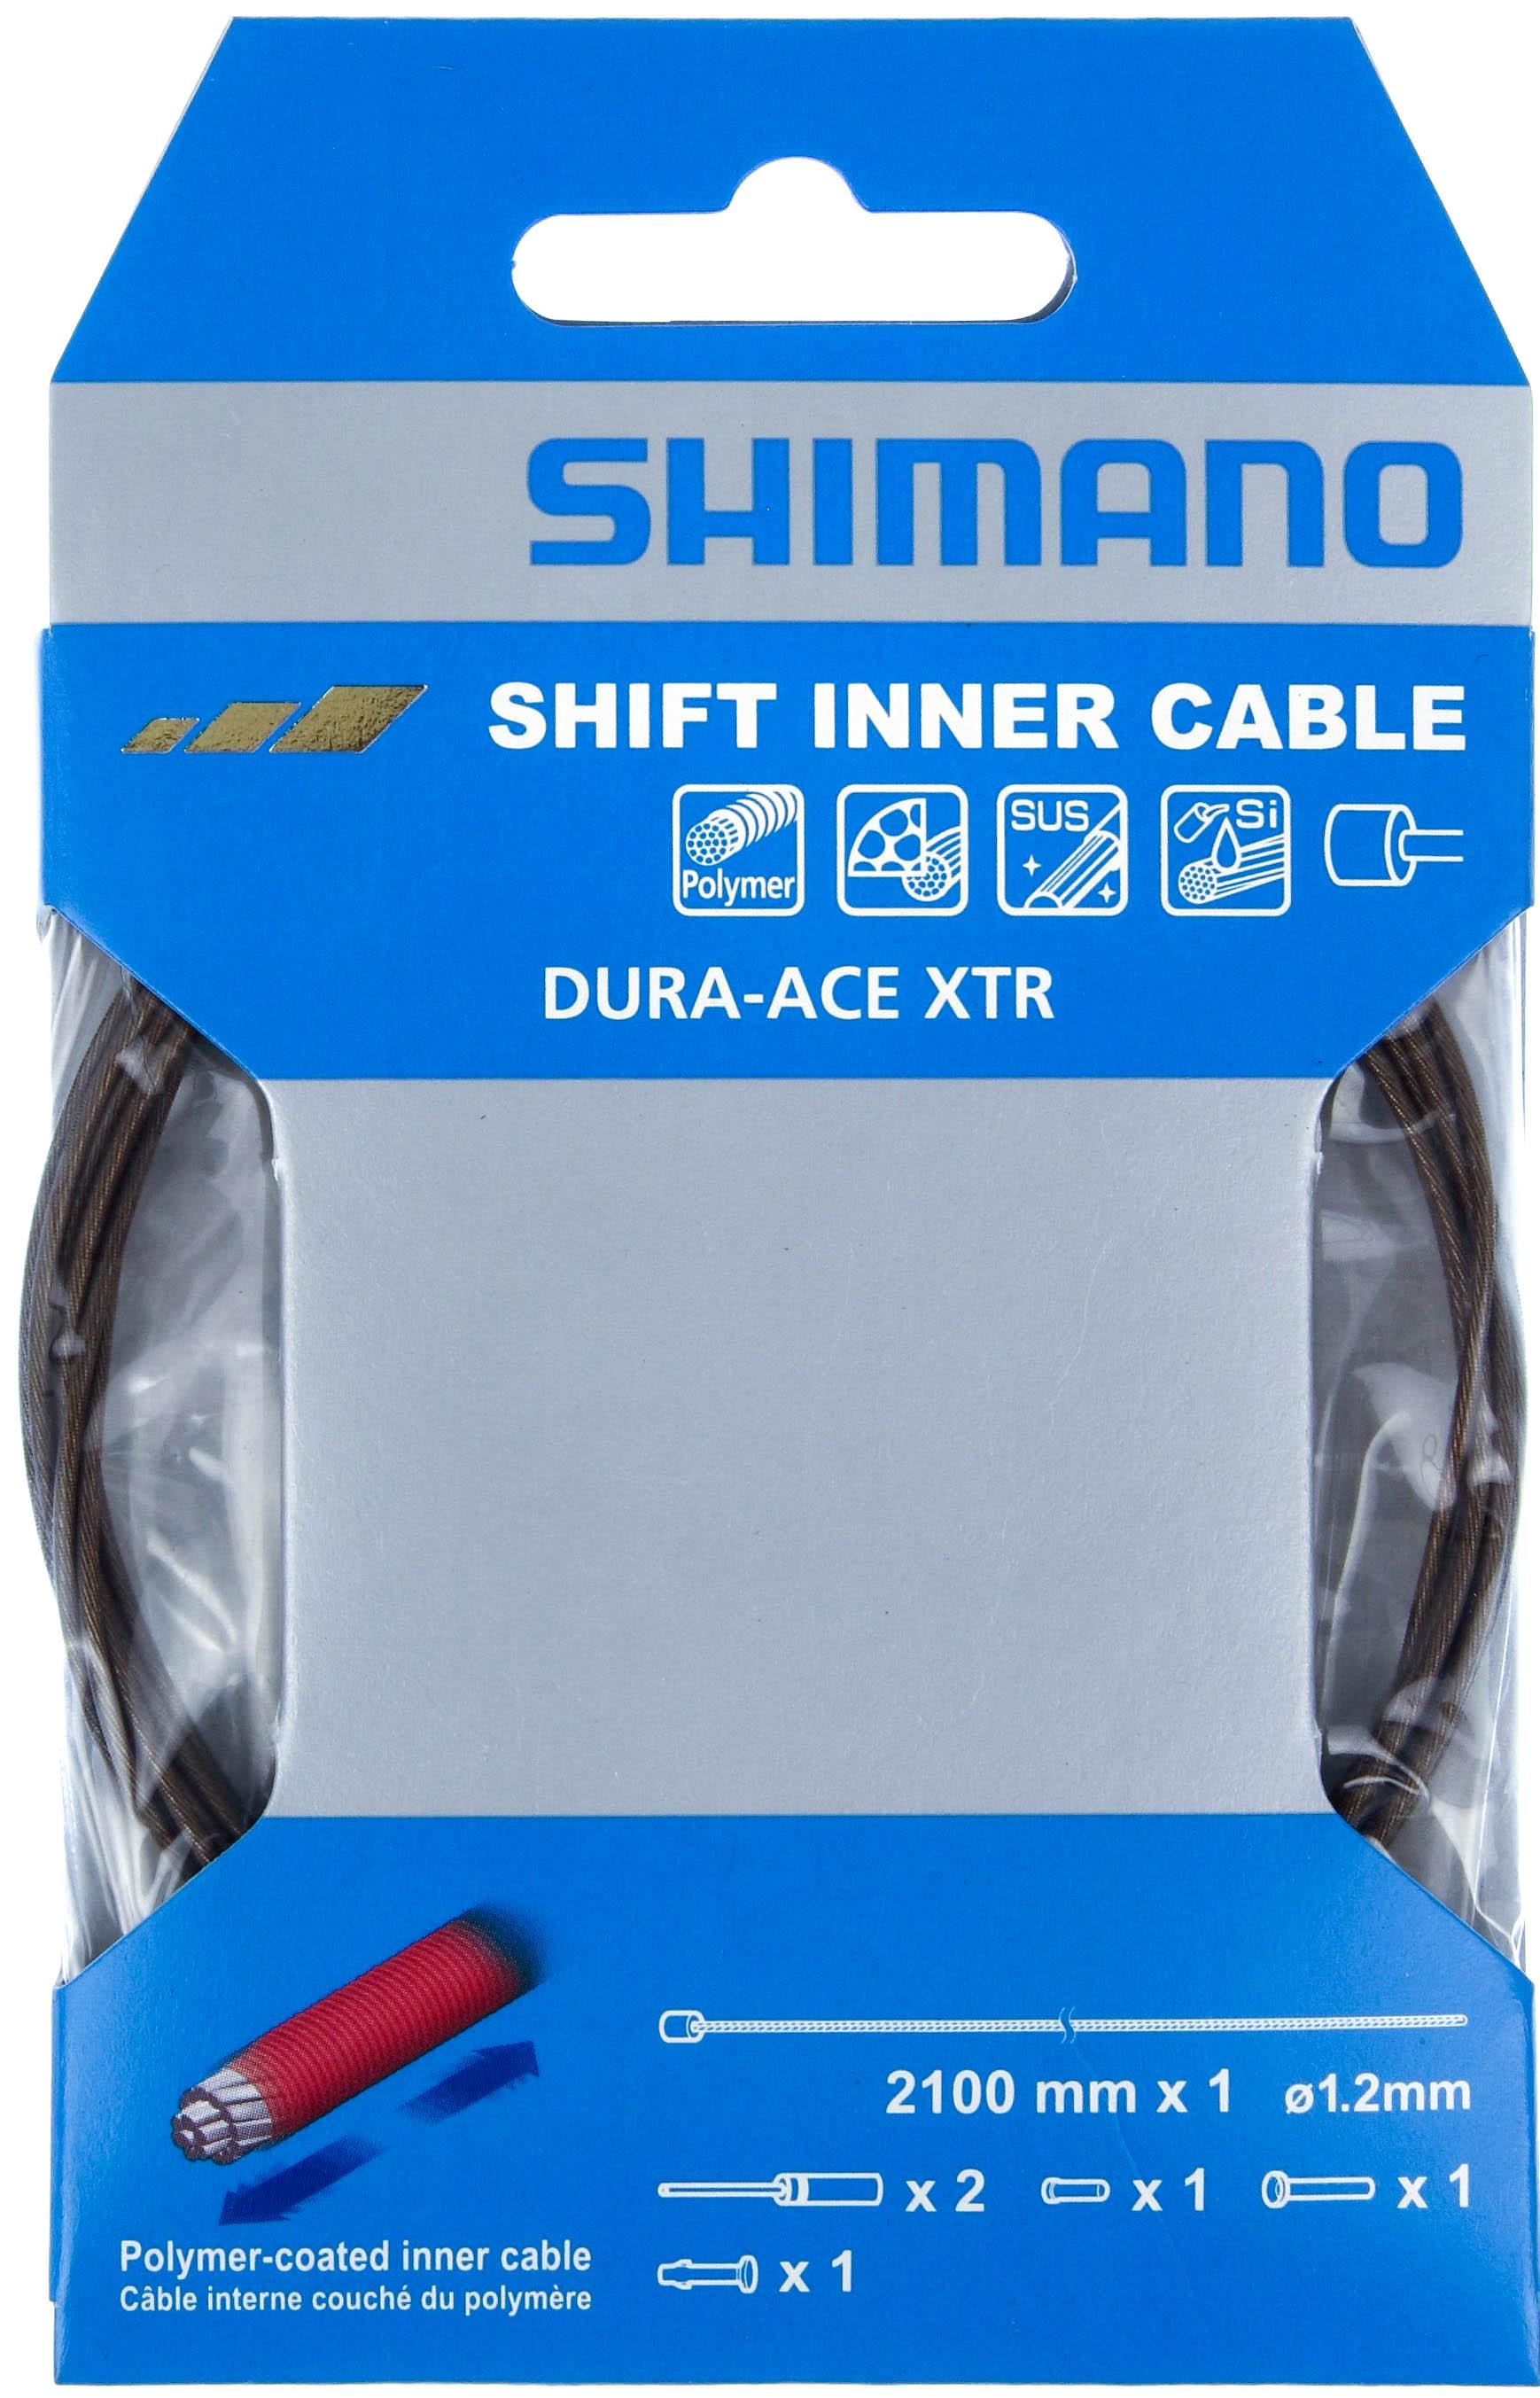 Shimano Dura-ace 9000 Inner Road Gear Cable - Black